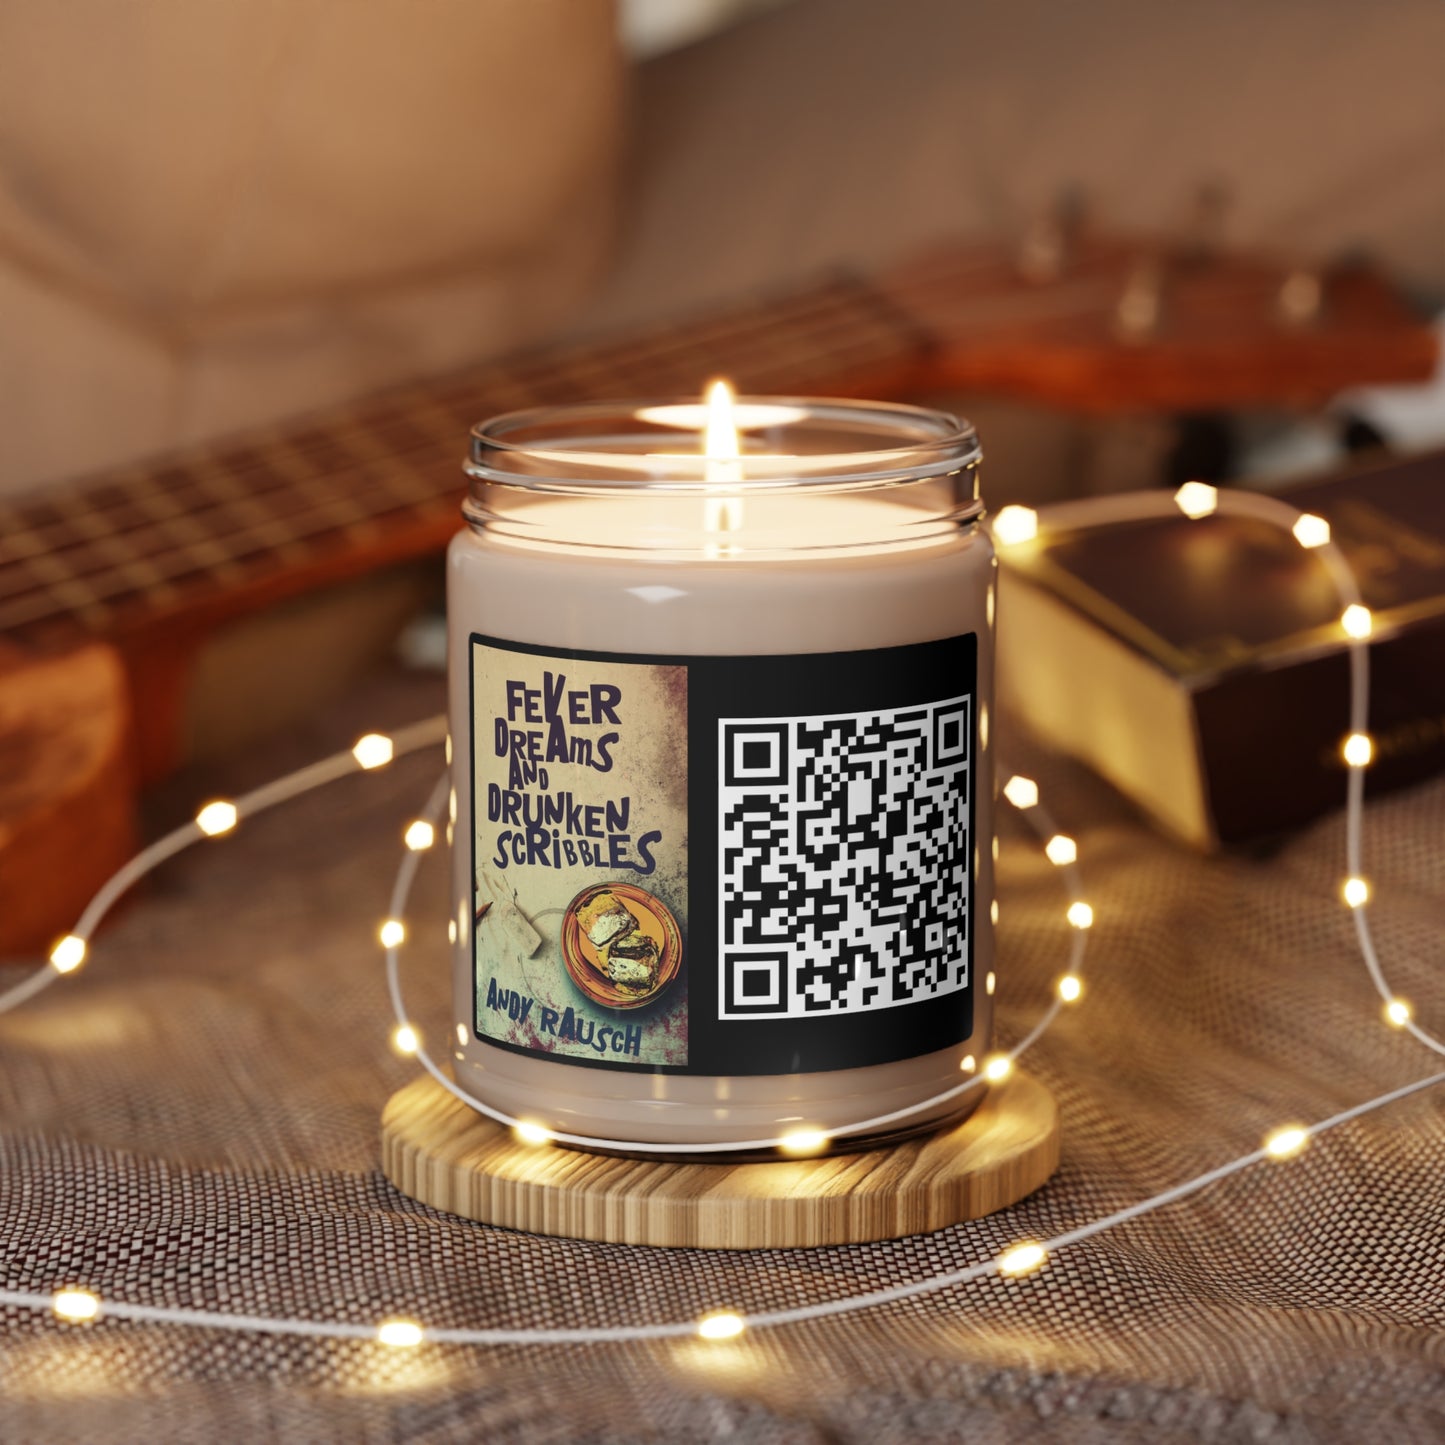 Fever Dreams and Drunken Scribbles - Scented Soy Candle